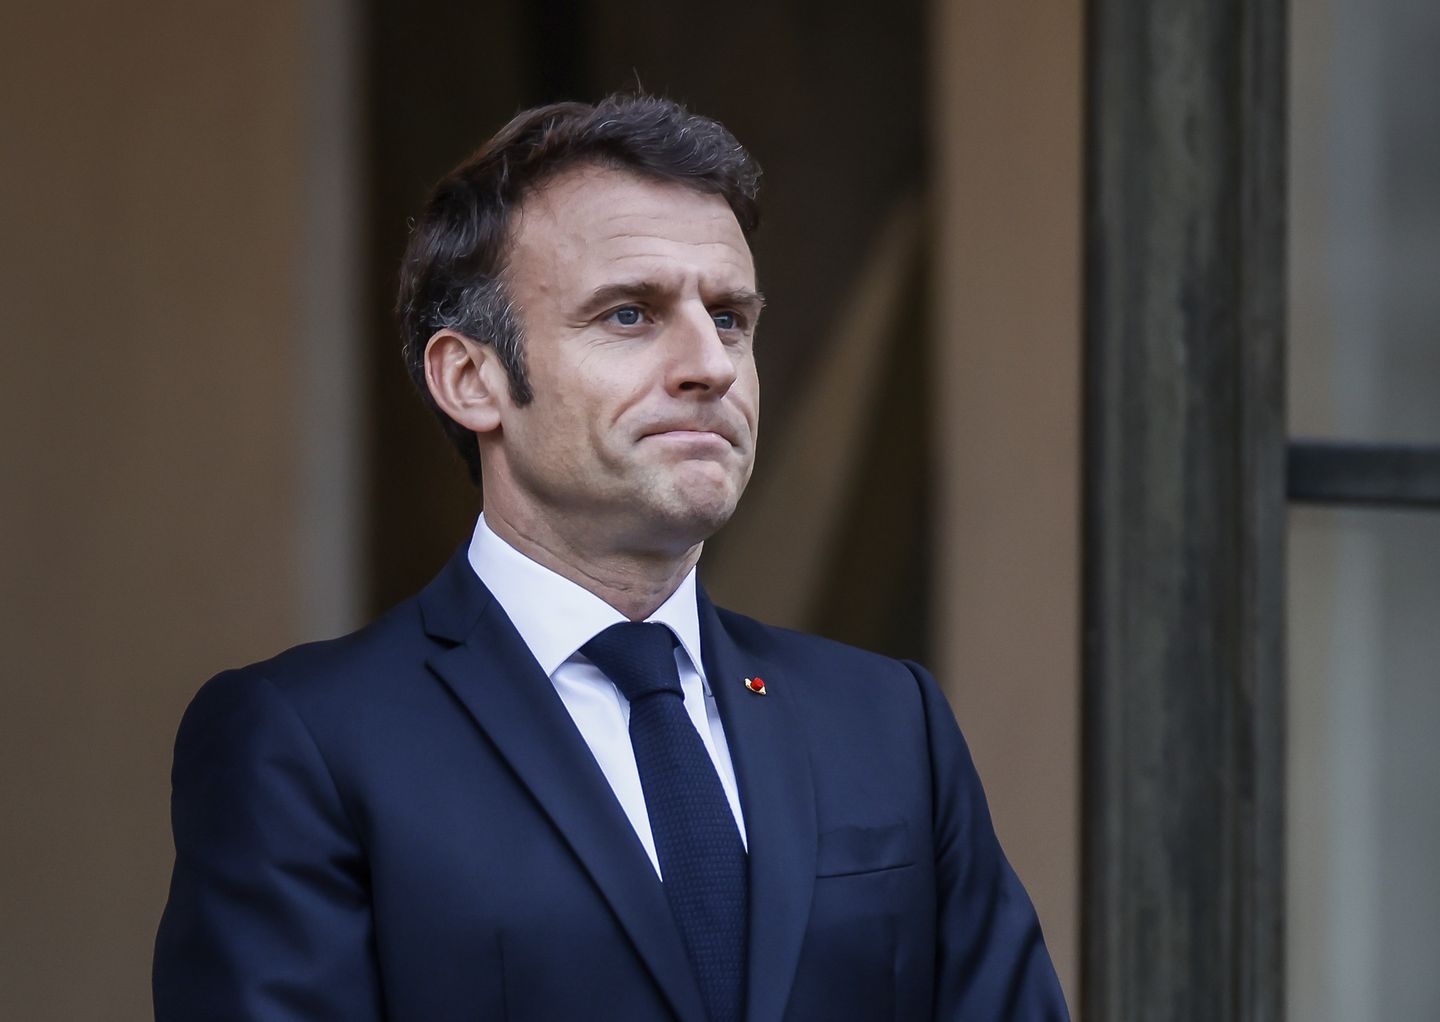 As pension protests rage, President Macron of France is caught taking off luxury watch in interview